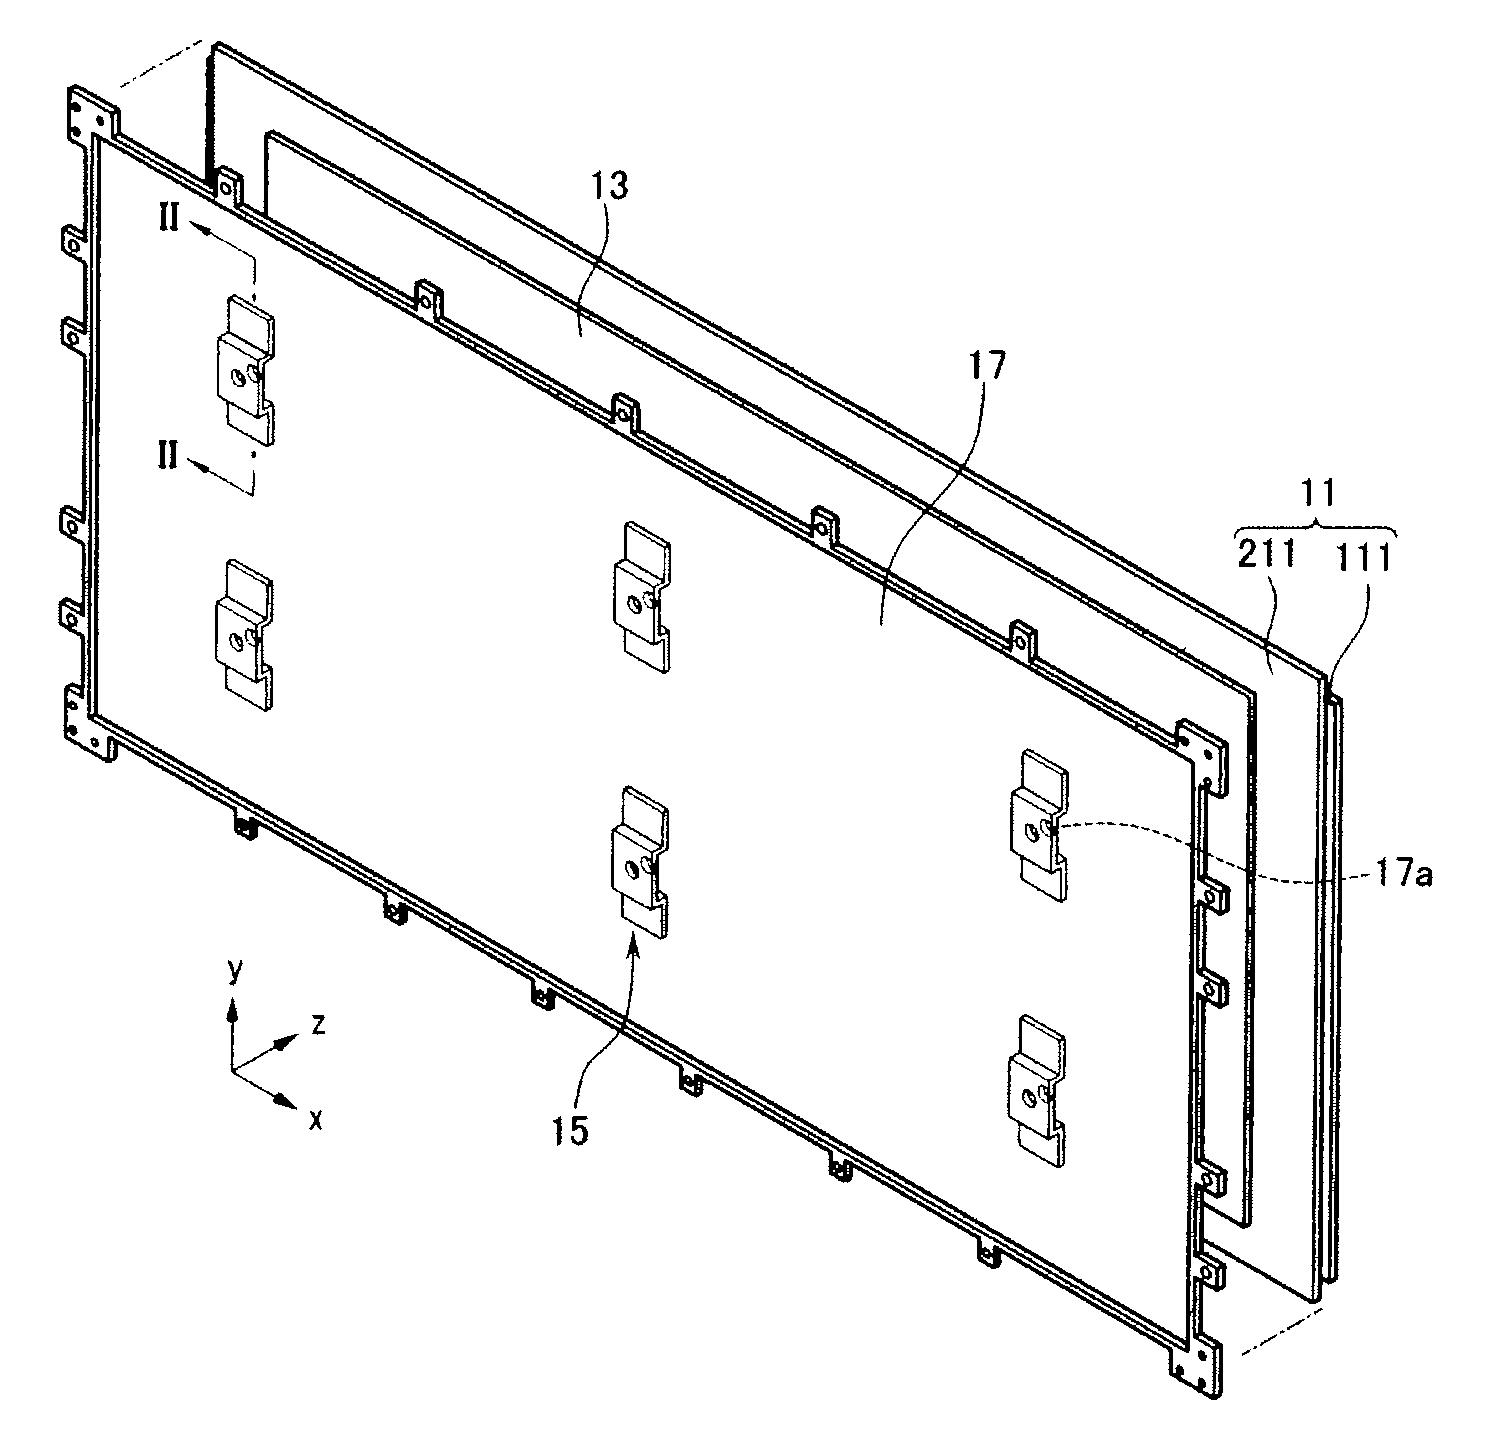 Display device with improved heat dissipation